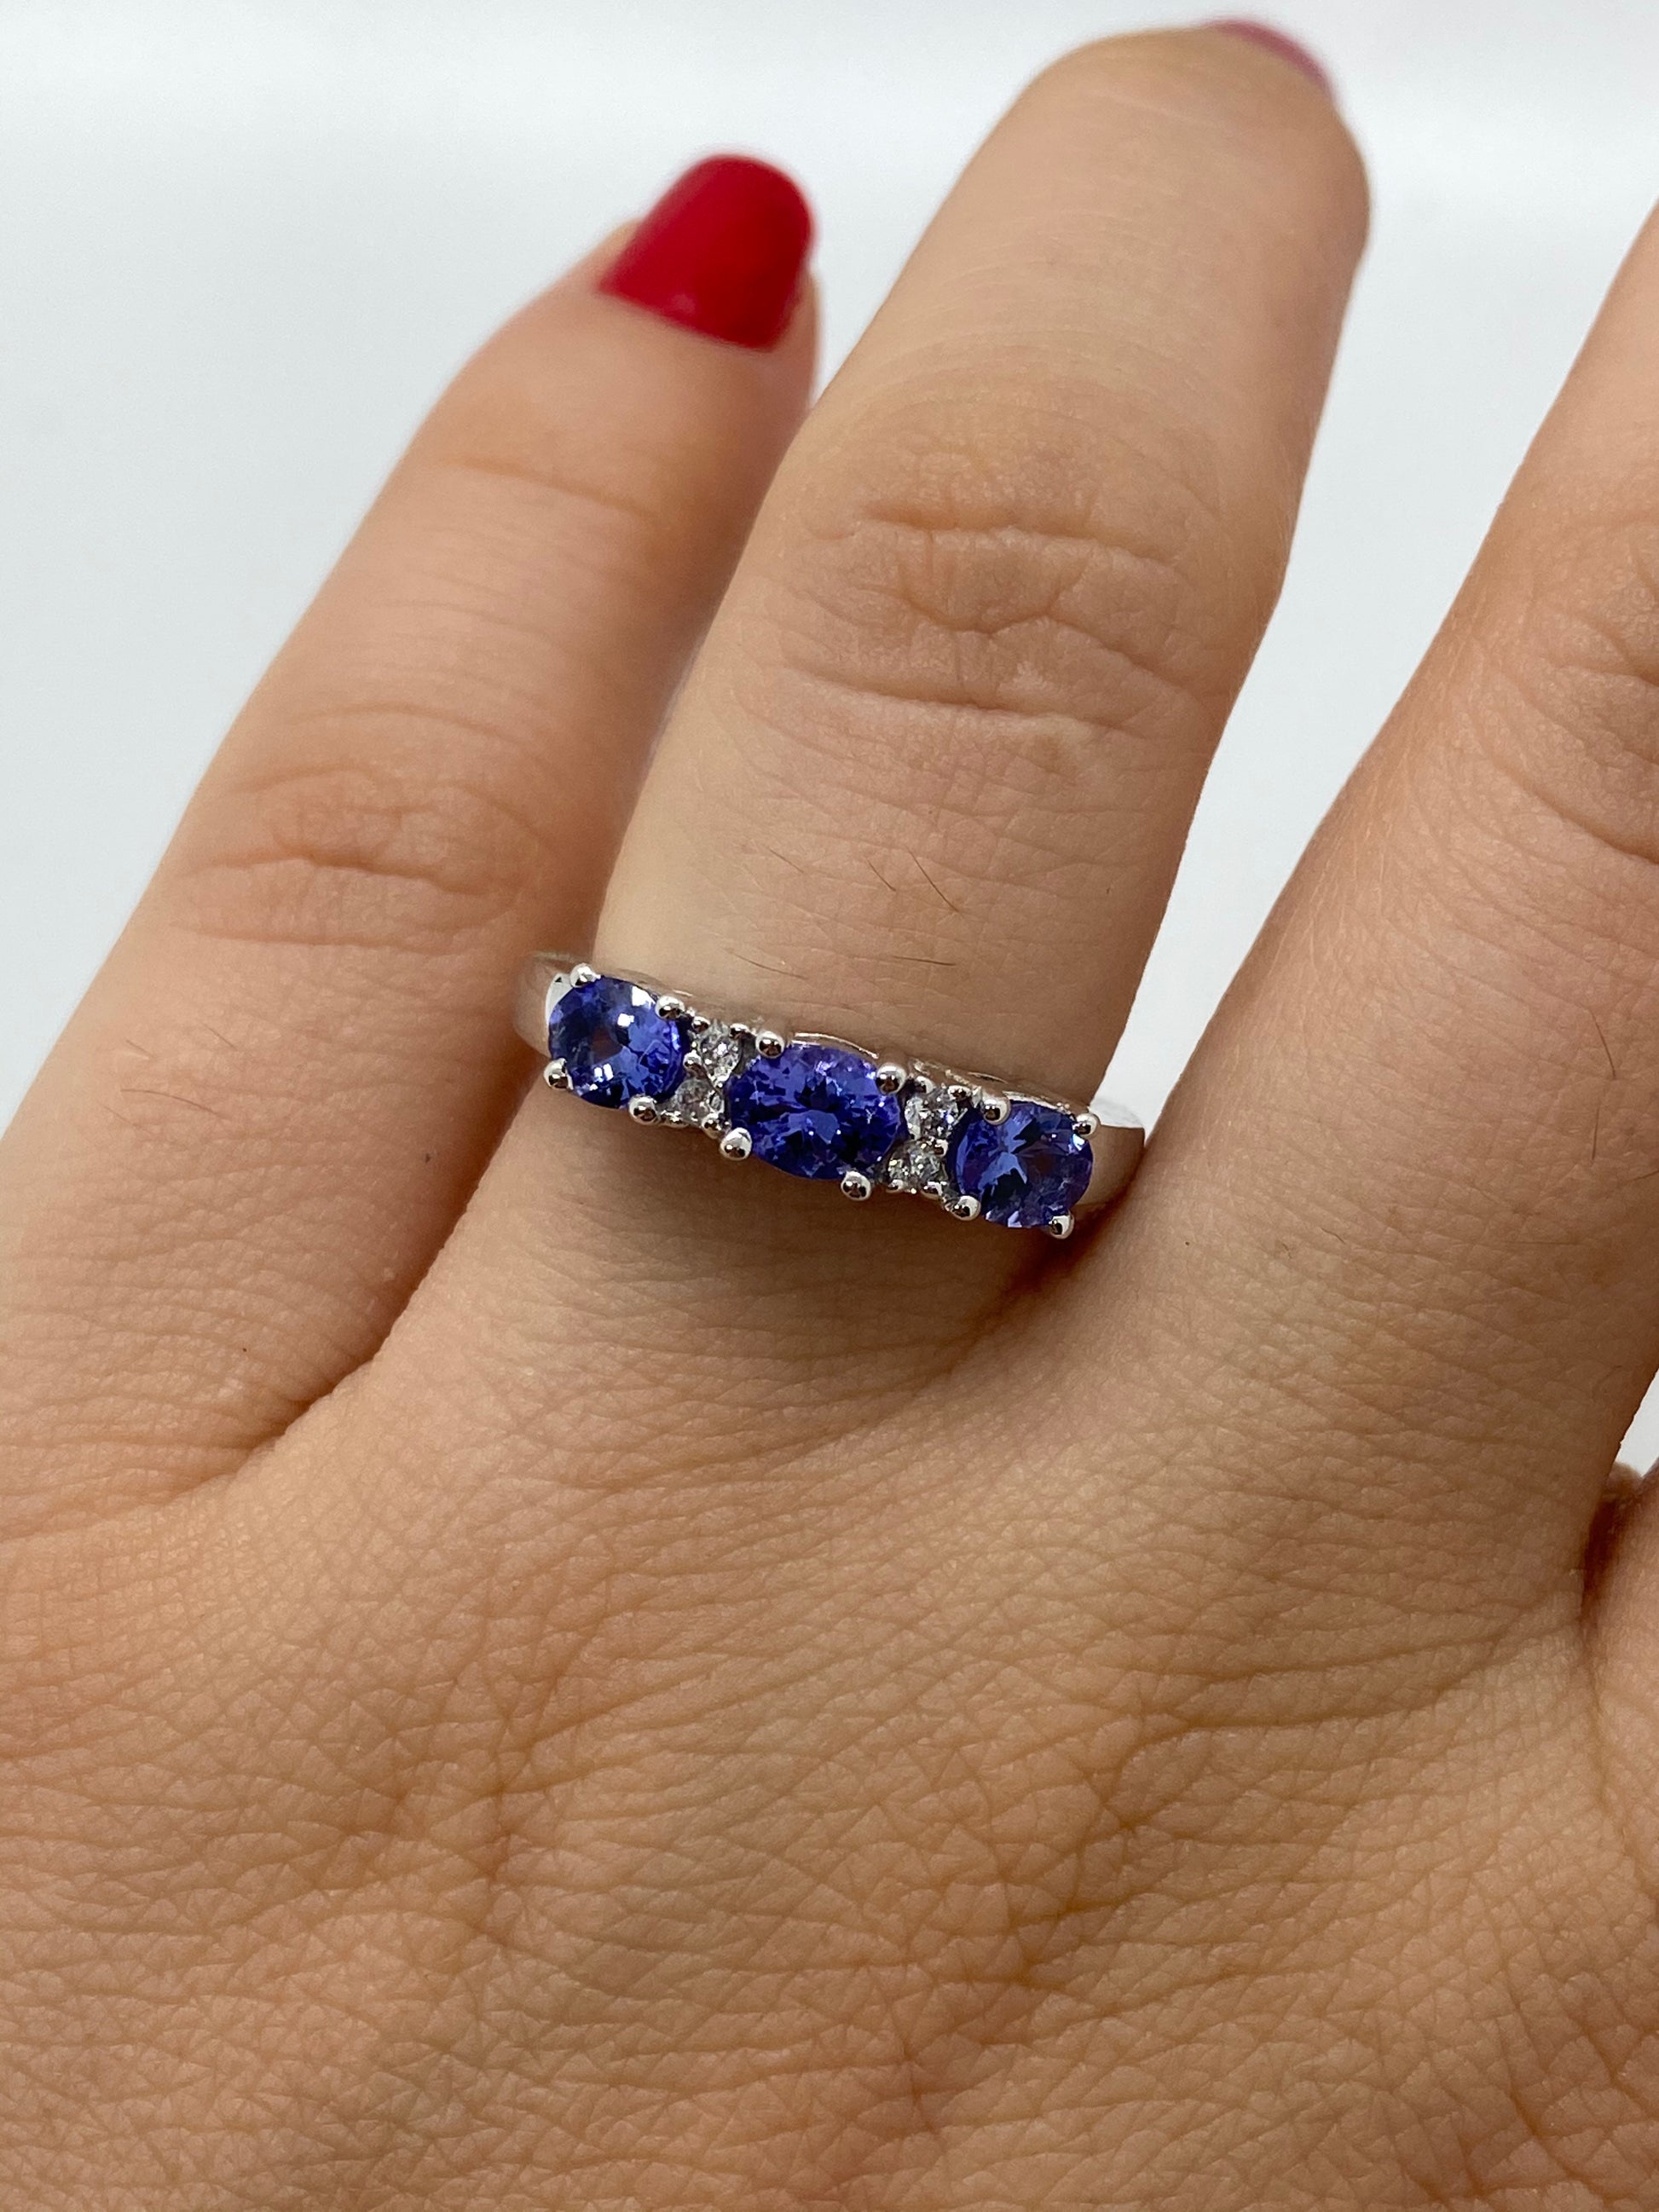 Tanzanite Ring R19863 - Royal Gems and Jewelry